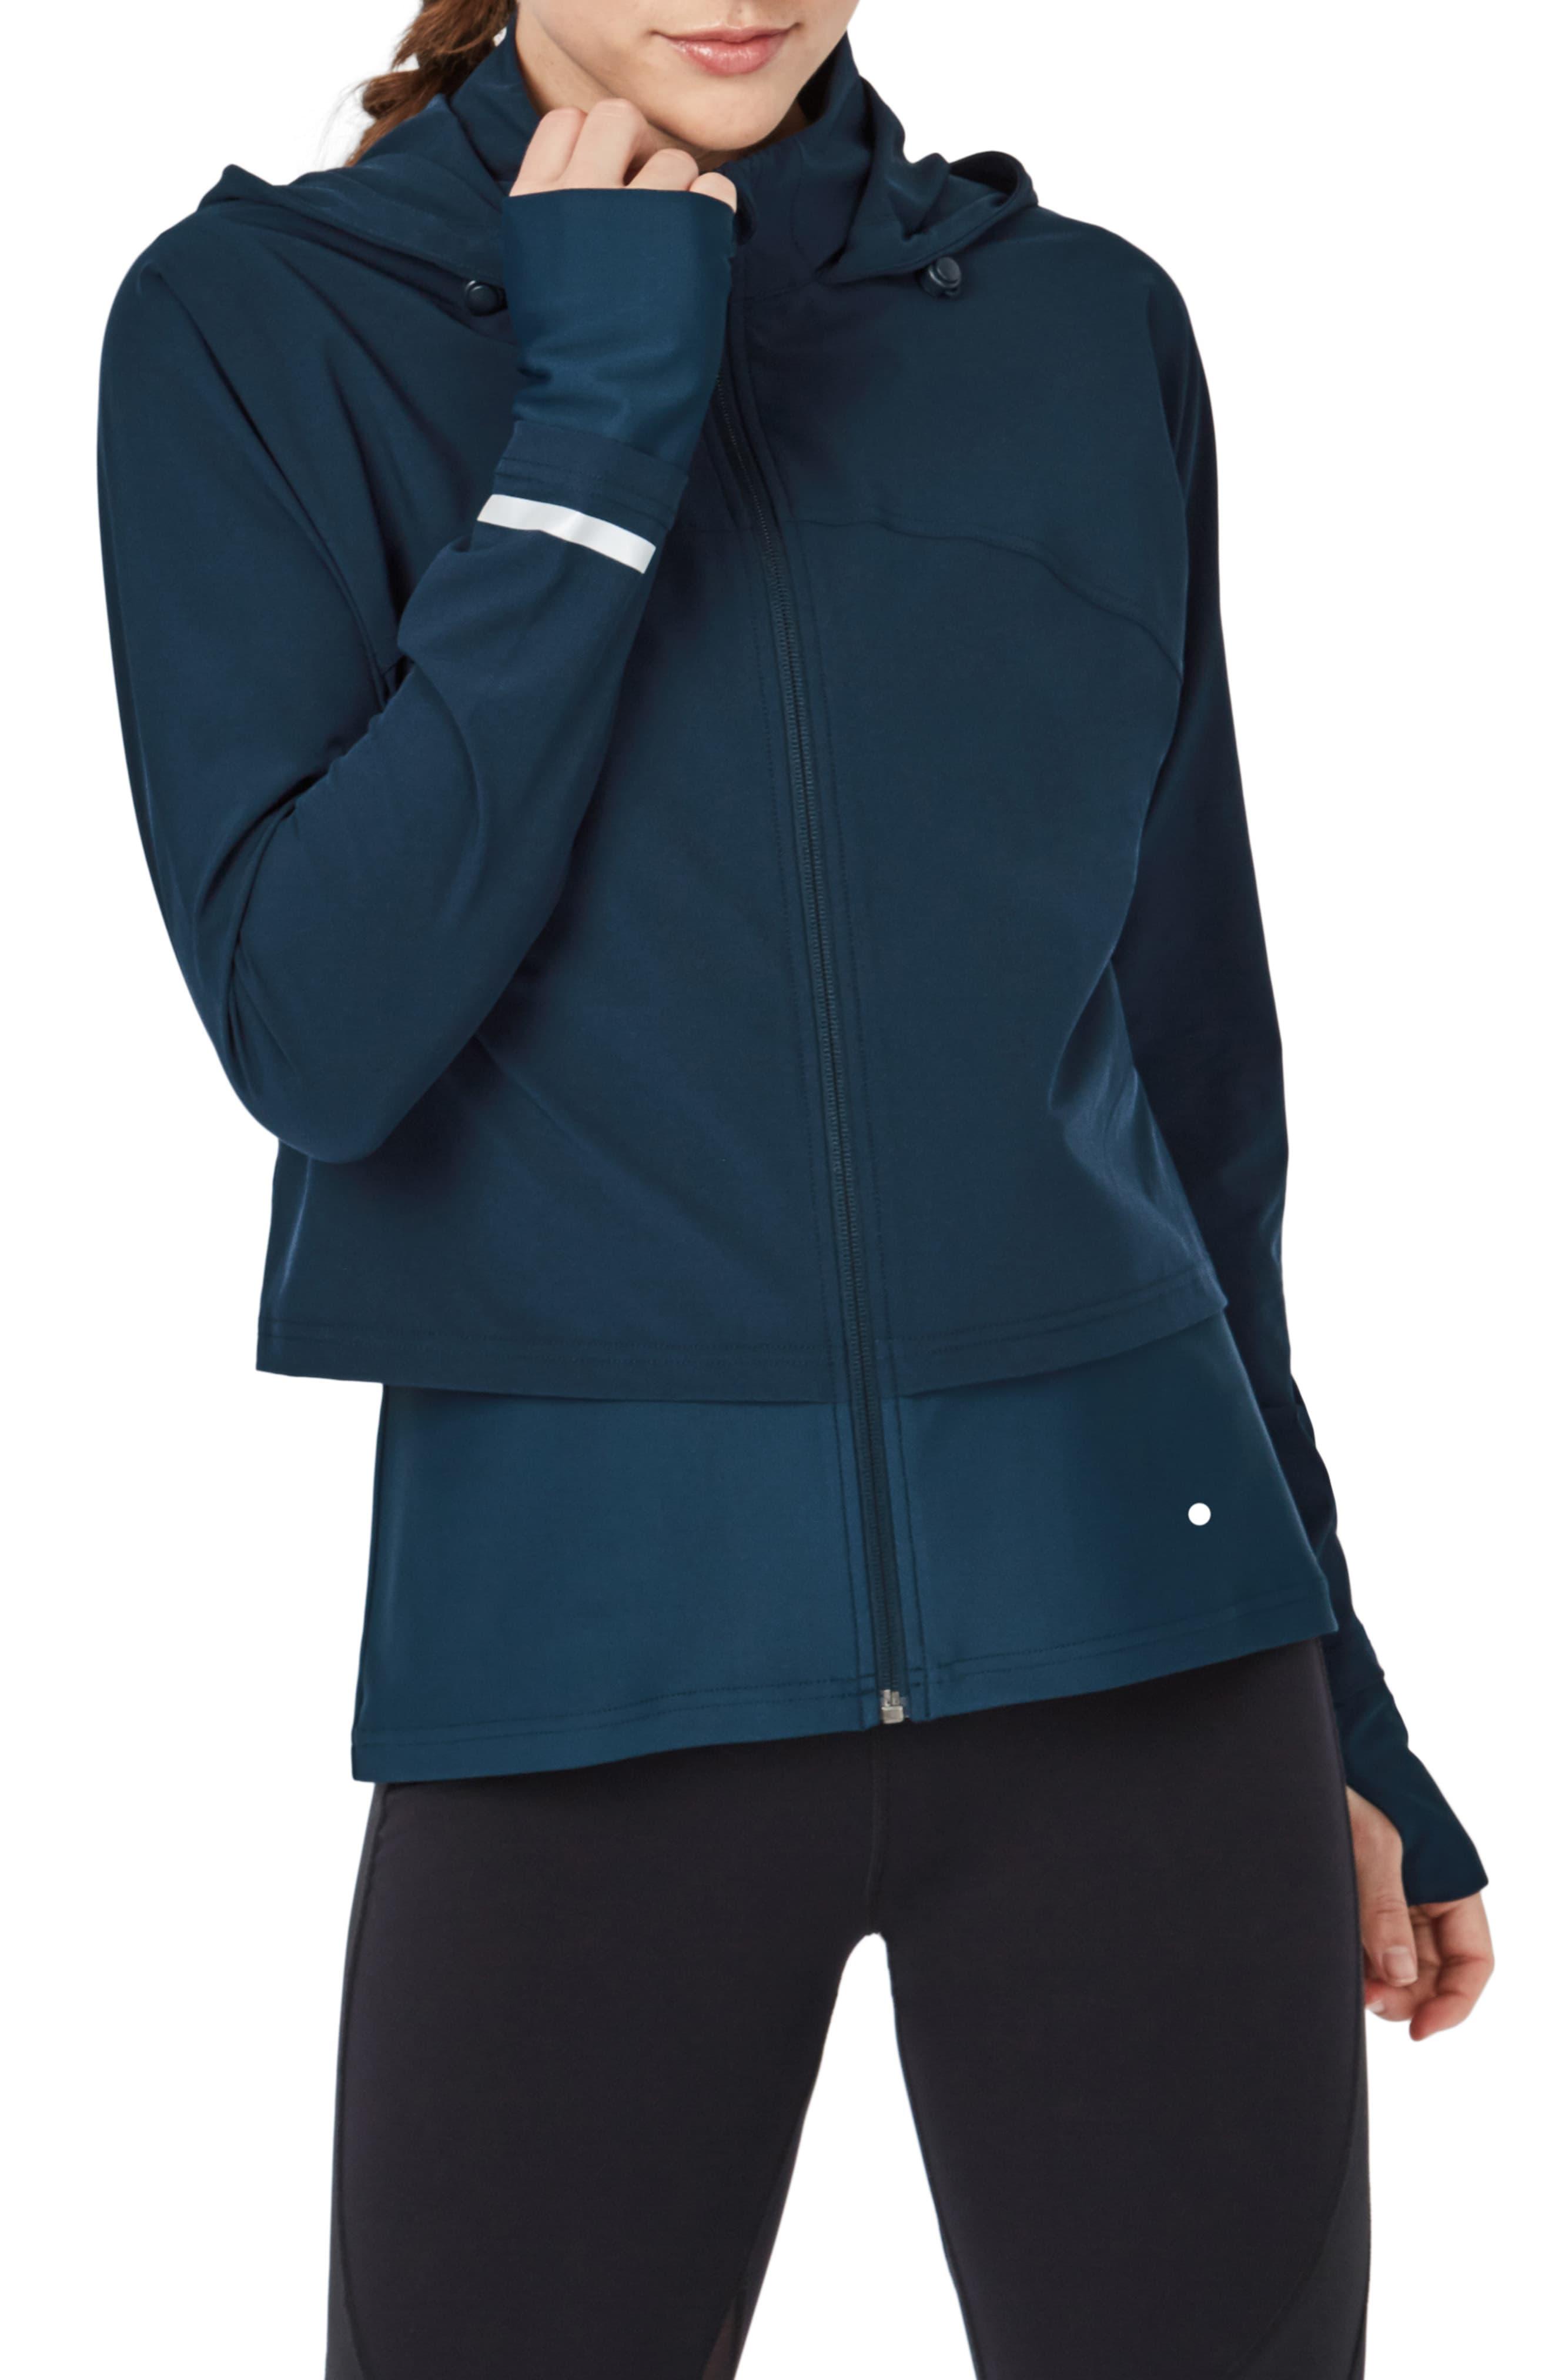 6 Reasons to Buy/Not to Buy Sweaty Betty Fast Track Thermal